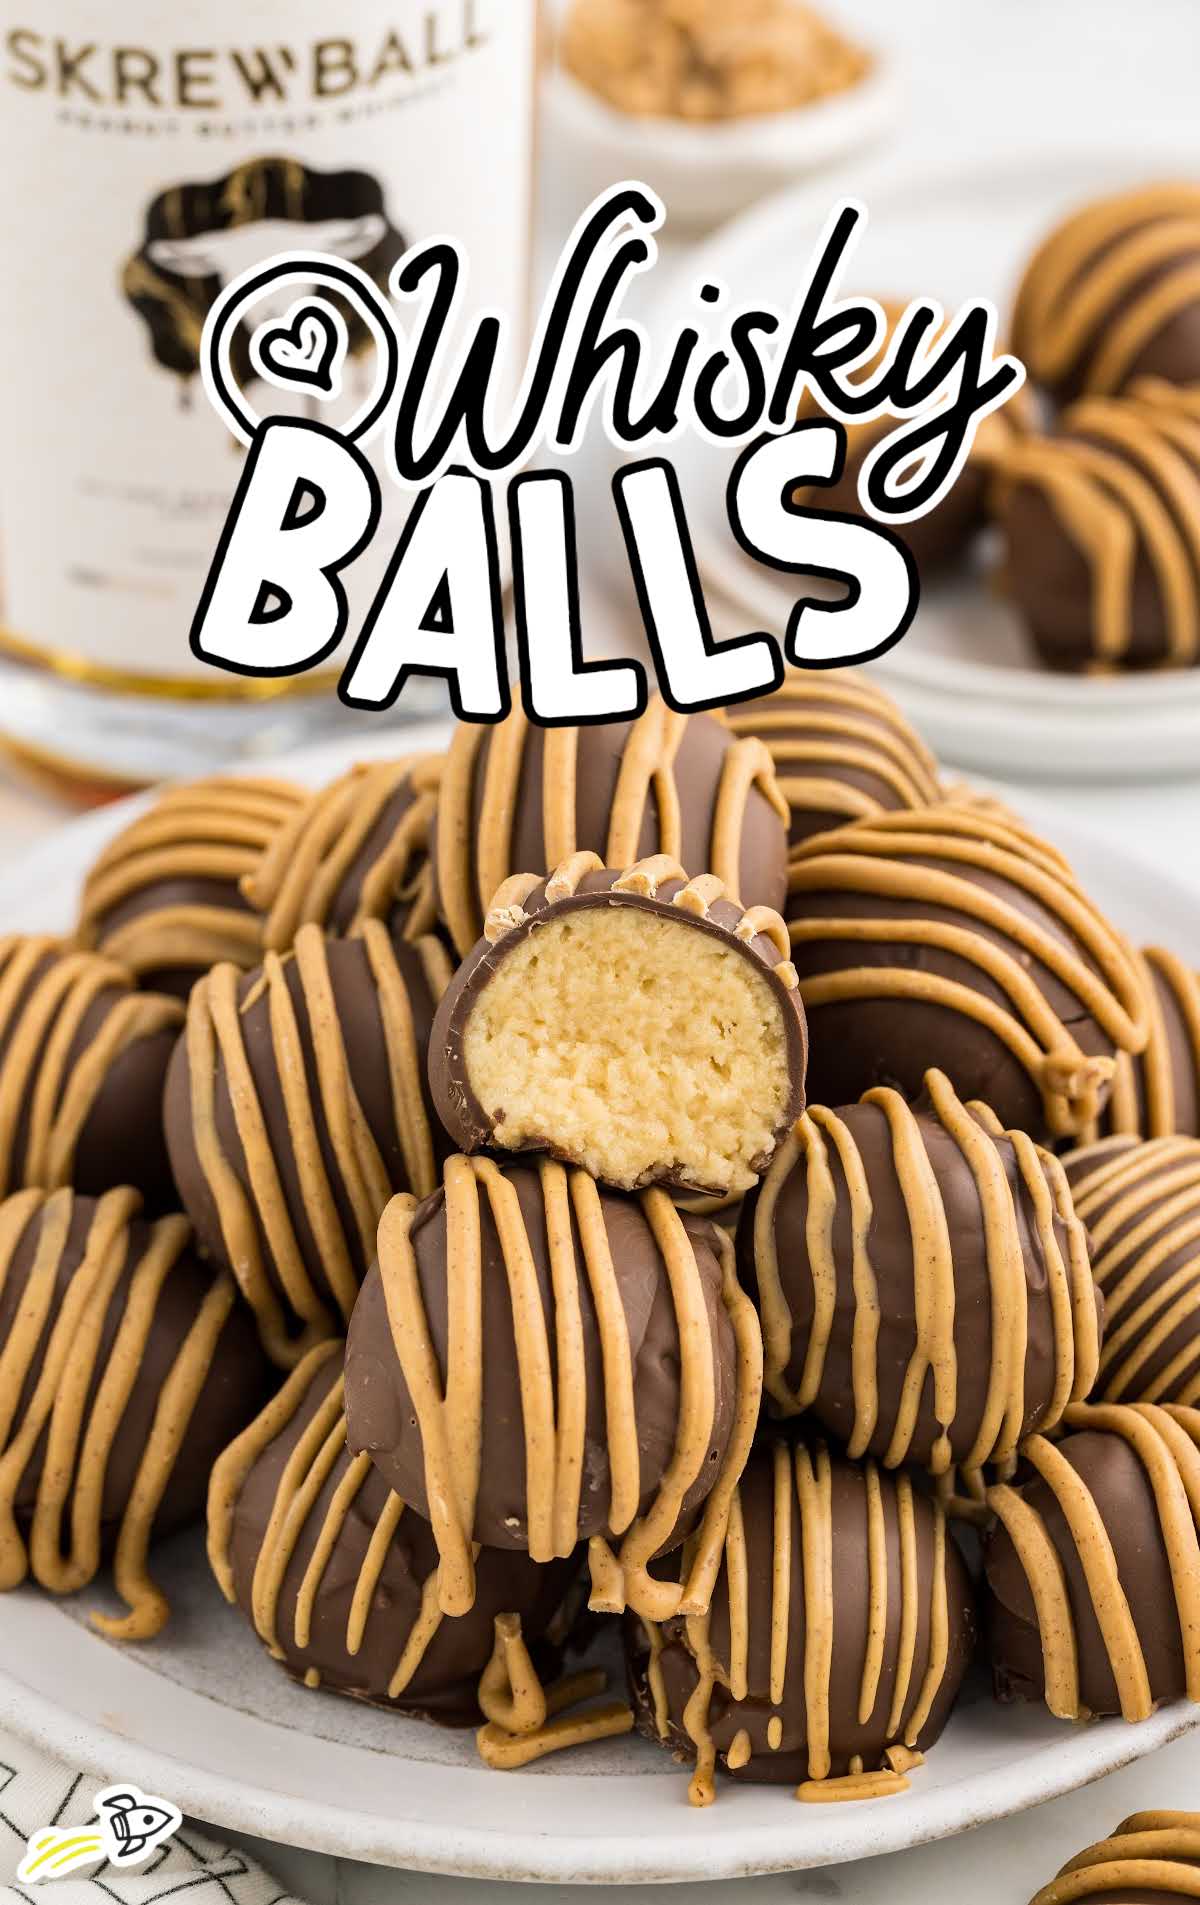 a plate of Whisky Balls